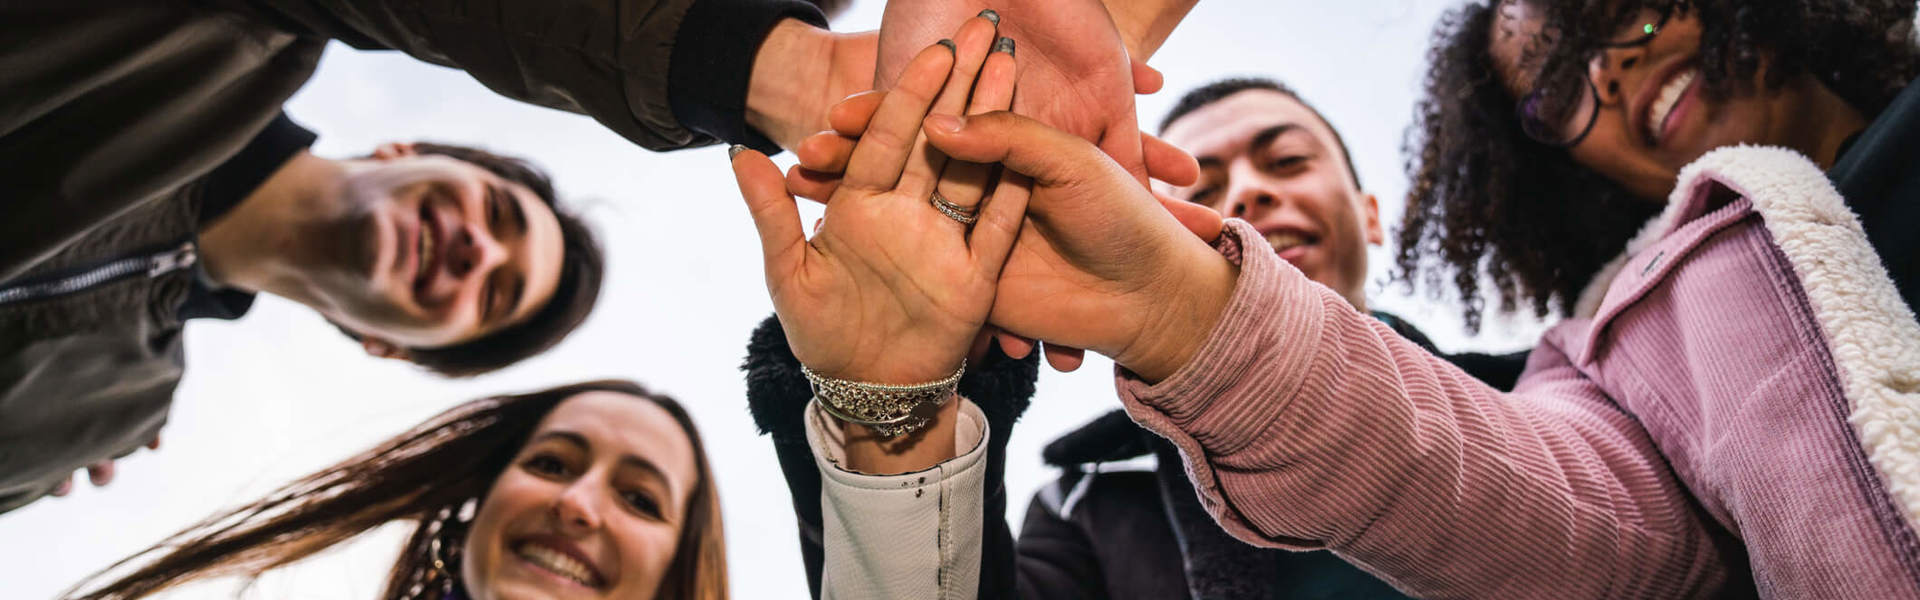 A group of supporters crossing hands